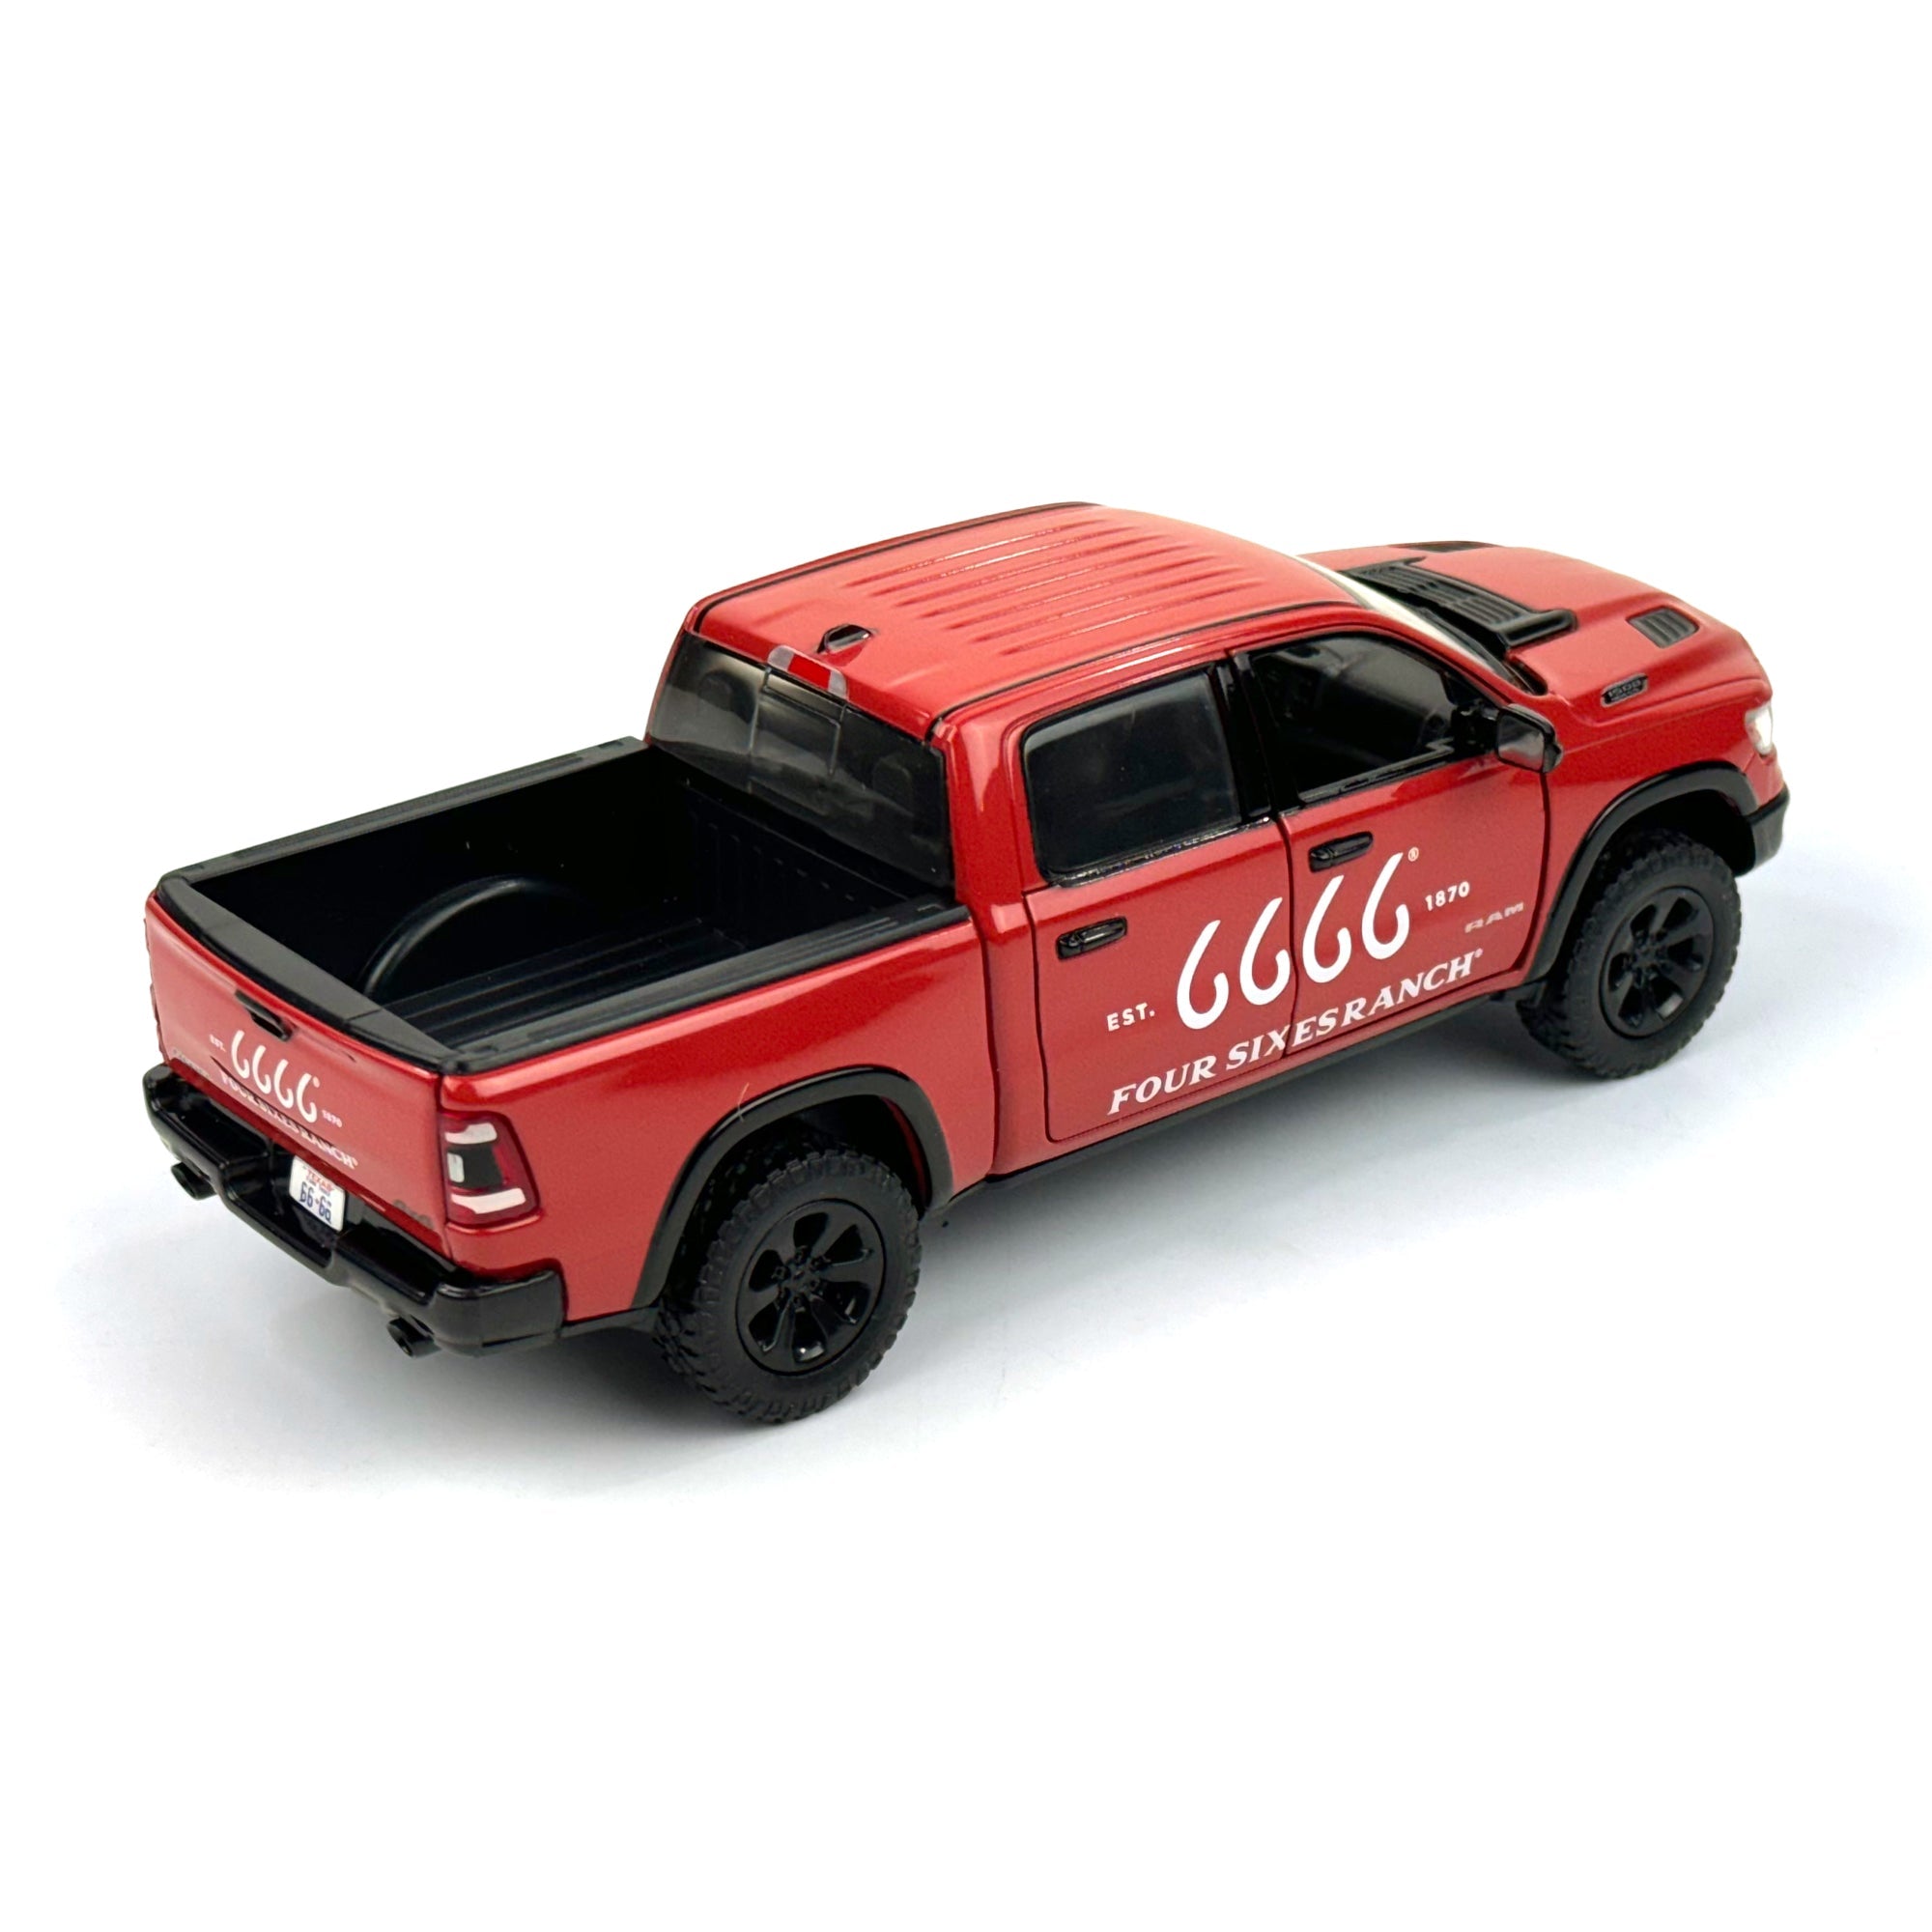 1:27 Scale Die-Cast – Four Sixes Ranch 2022 Ram 1500 Rebel | bigcountrytoys.com